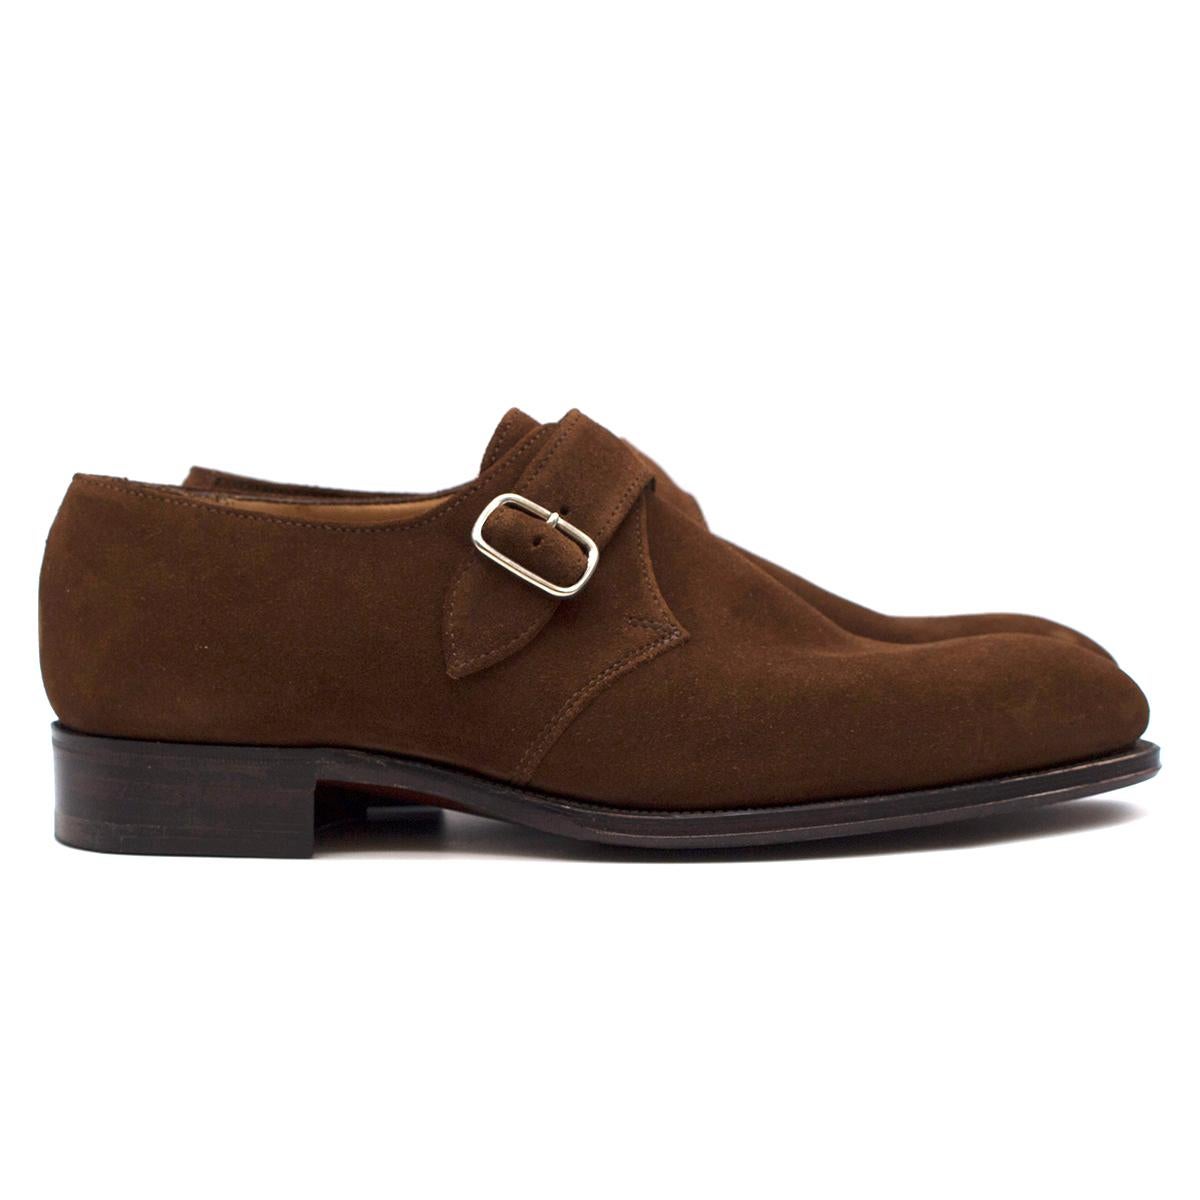 Hardy Amies Brown Suede Monk Shoes

- Brown suede monk shoes
- Round toe
- Front buckle fastening strap
- Nude leather lining with logo embroidered
- Brown leather sole
- This item comes with the original shoe box

Please note, these items are